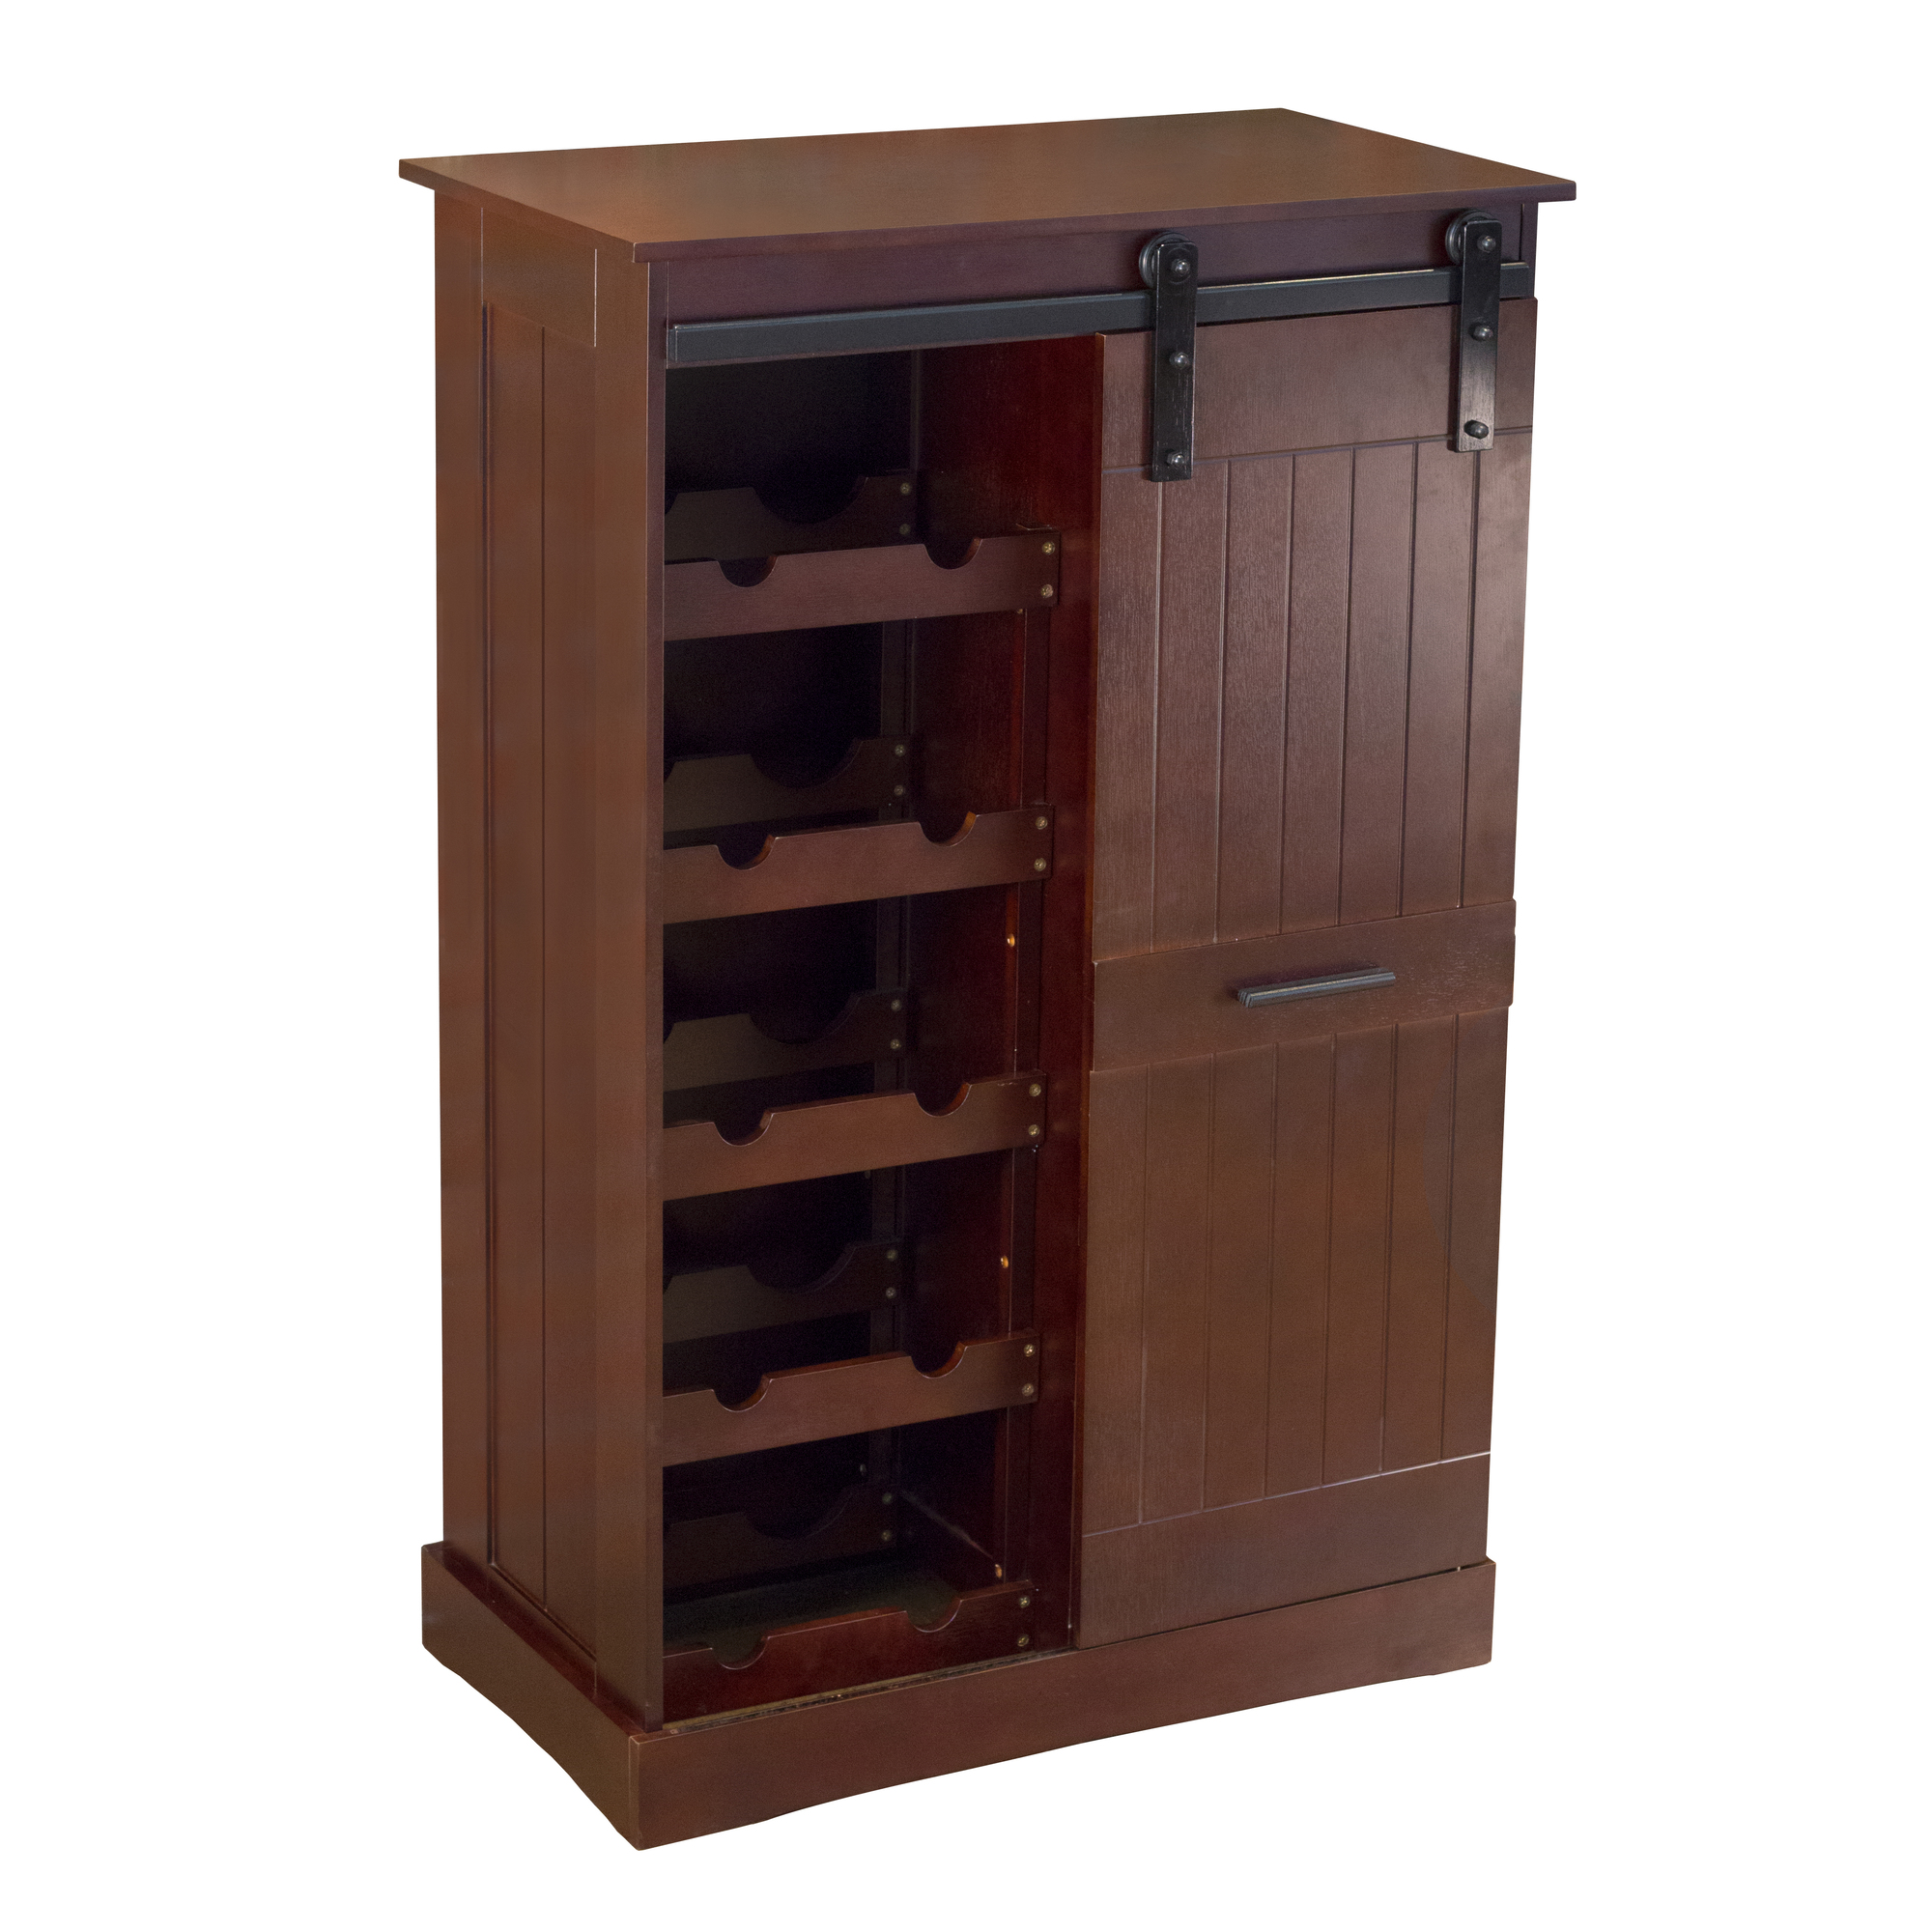 Merry Products, Oxford Bar Cabinet, Width 27.56 in, Depth 14.96 in, Material MDF, Model WNR0051710800